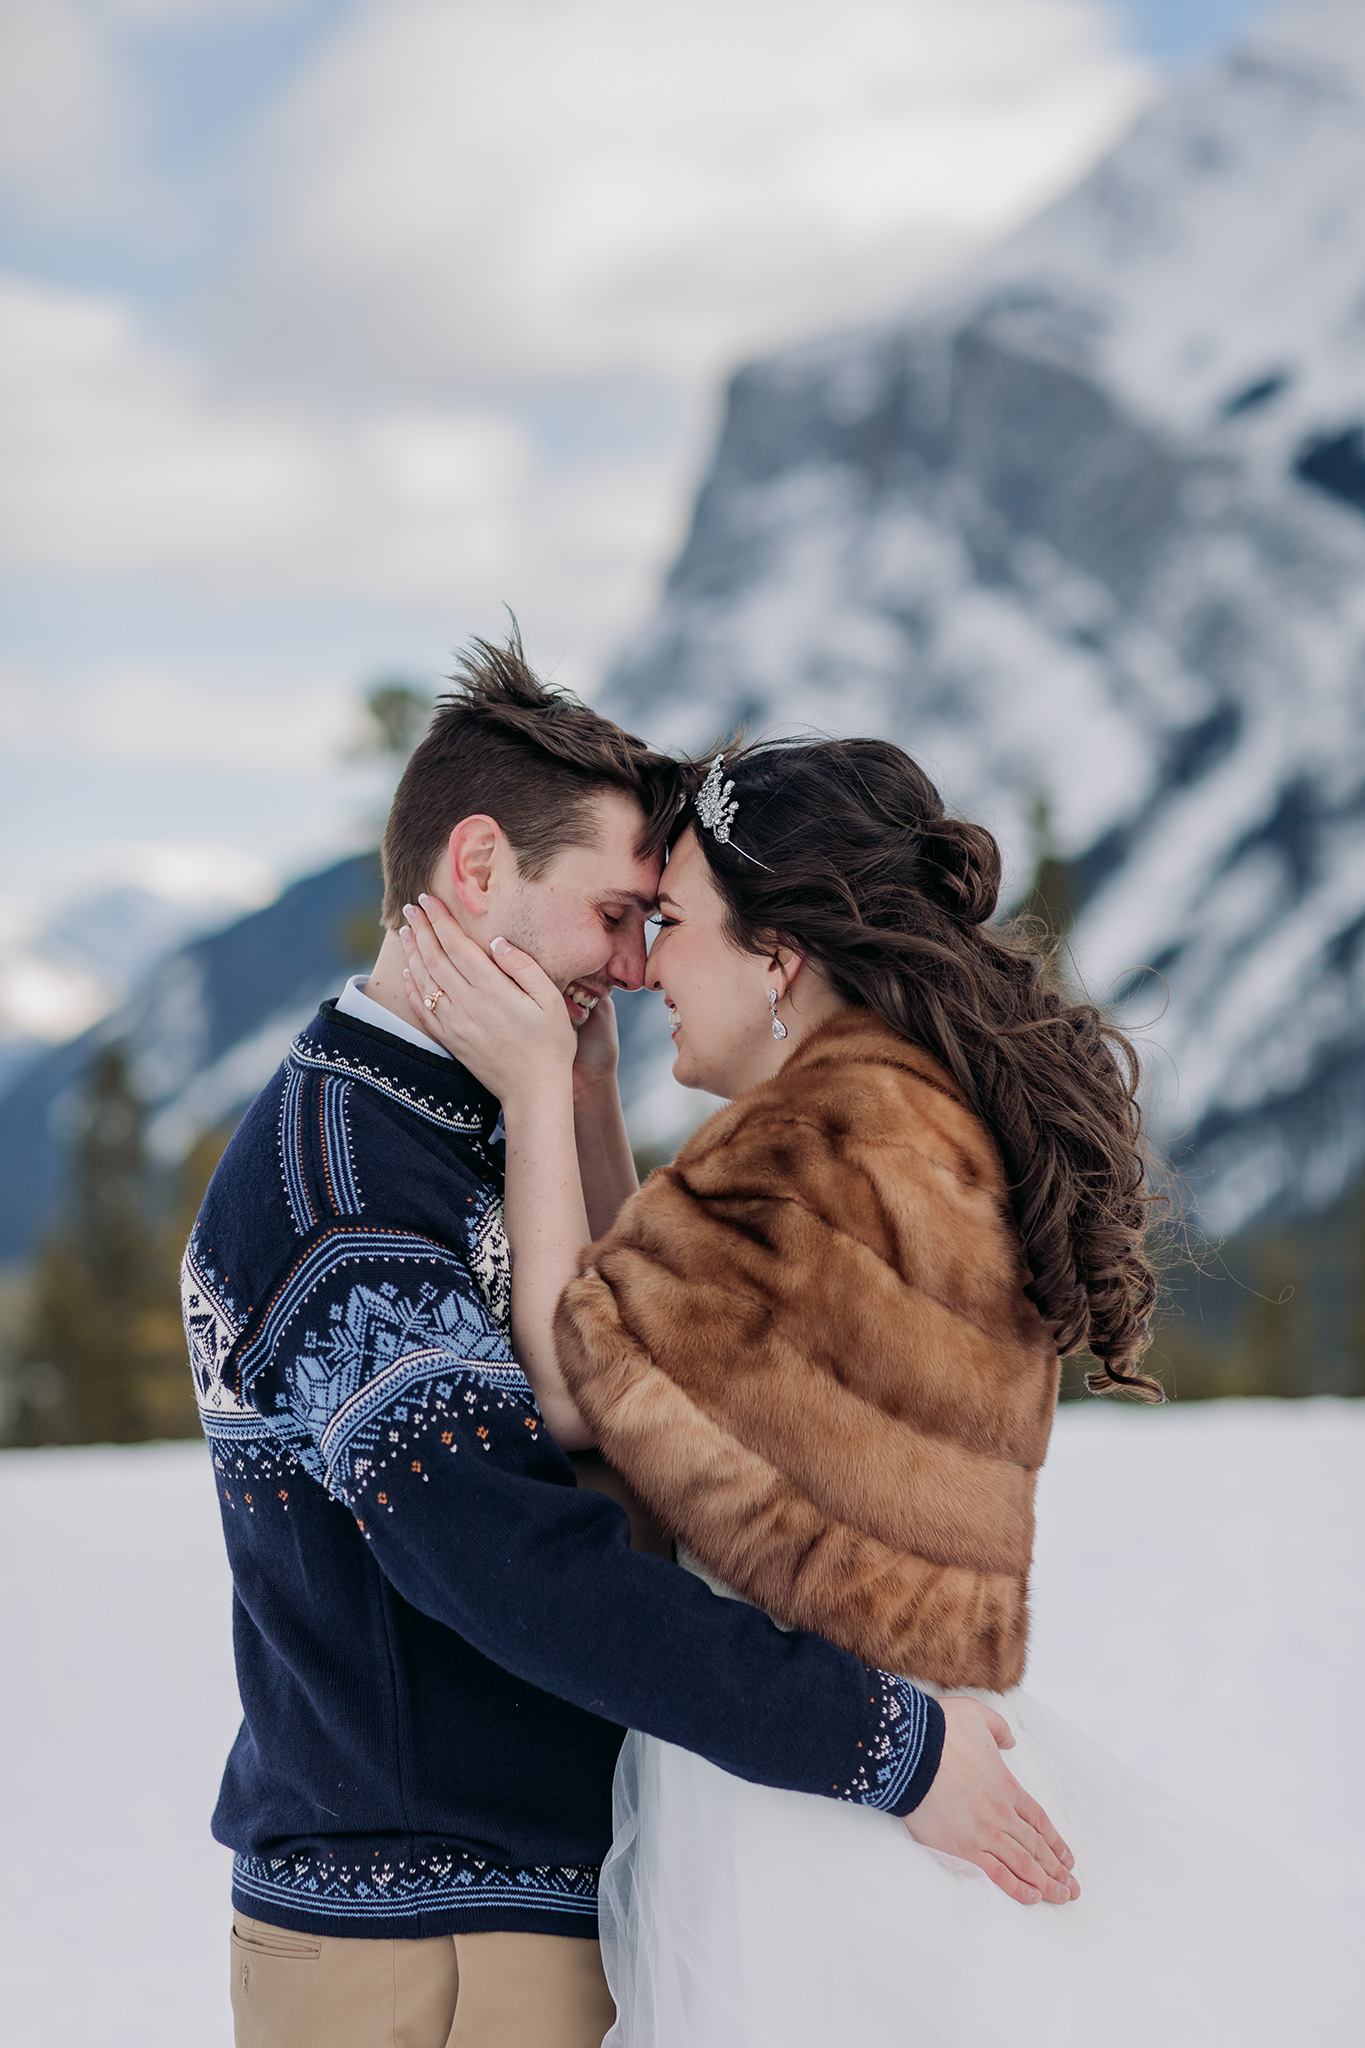 winter wedding portraits in Banff National Park photographed by ENV Photography